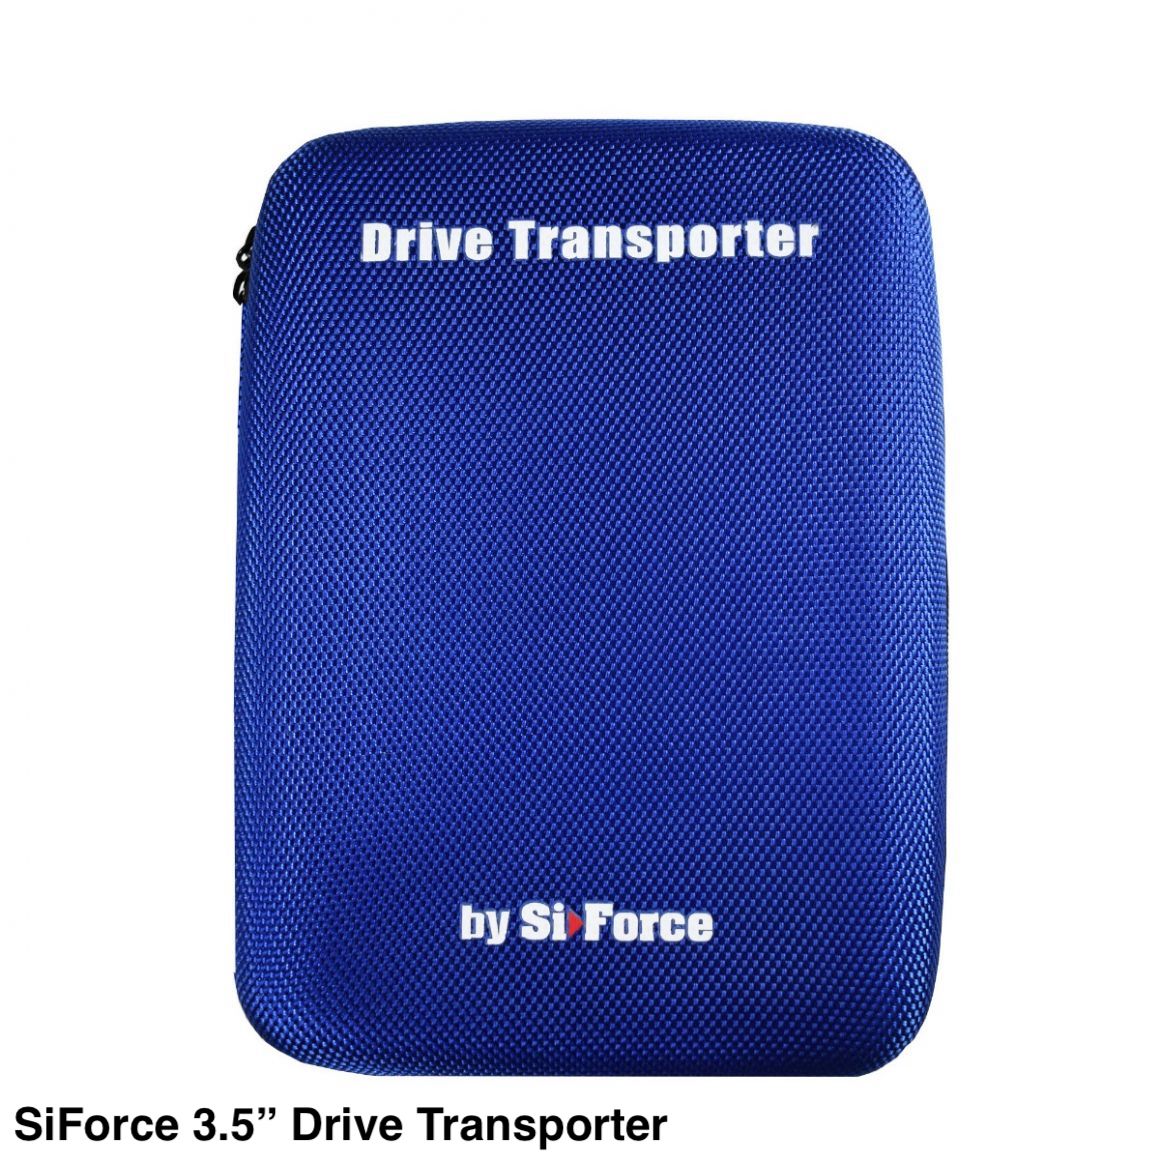 SiForce Drive Transporter Feature Image